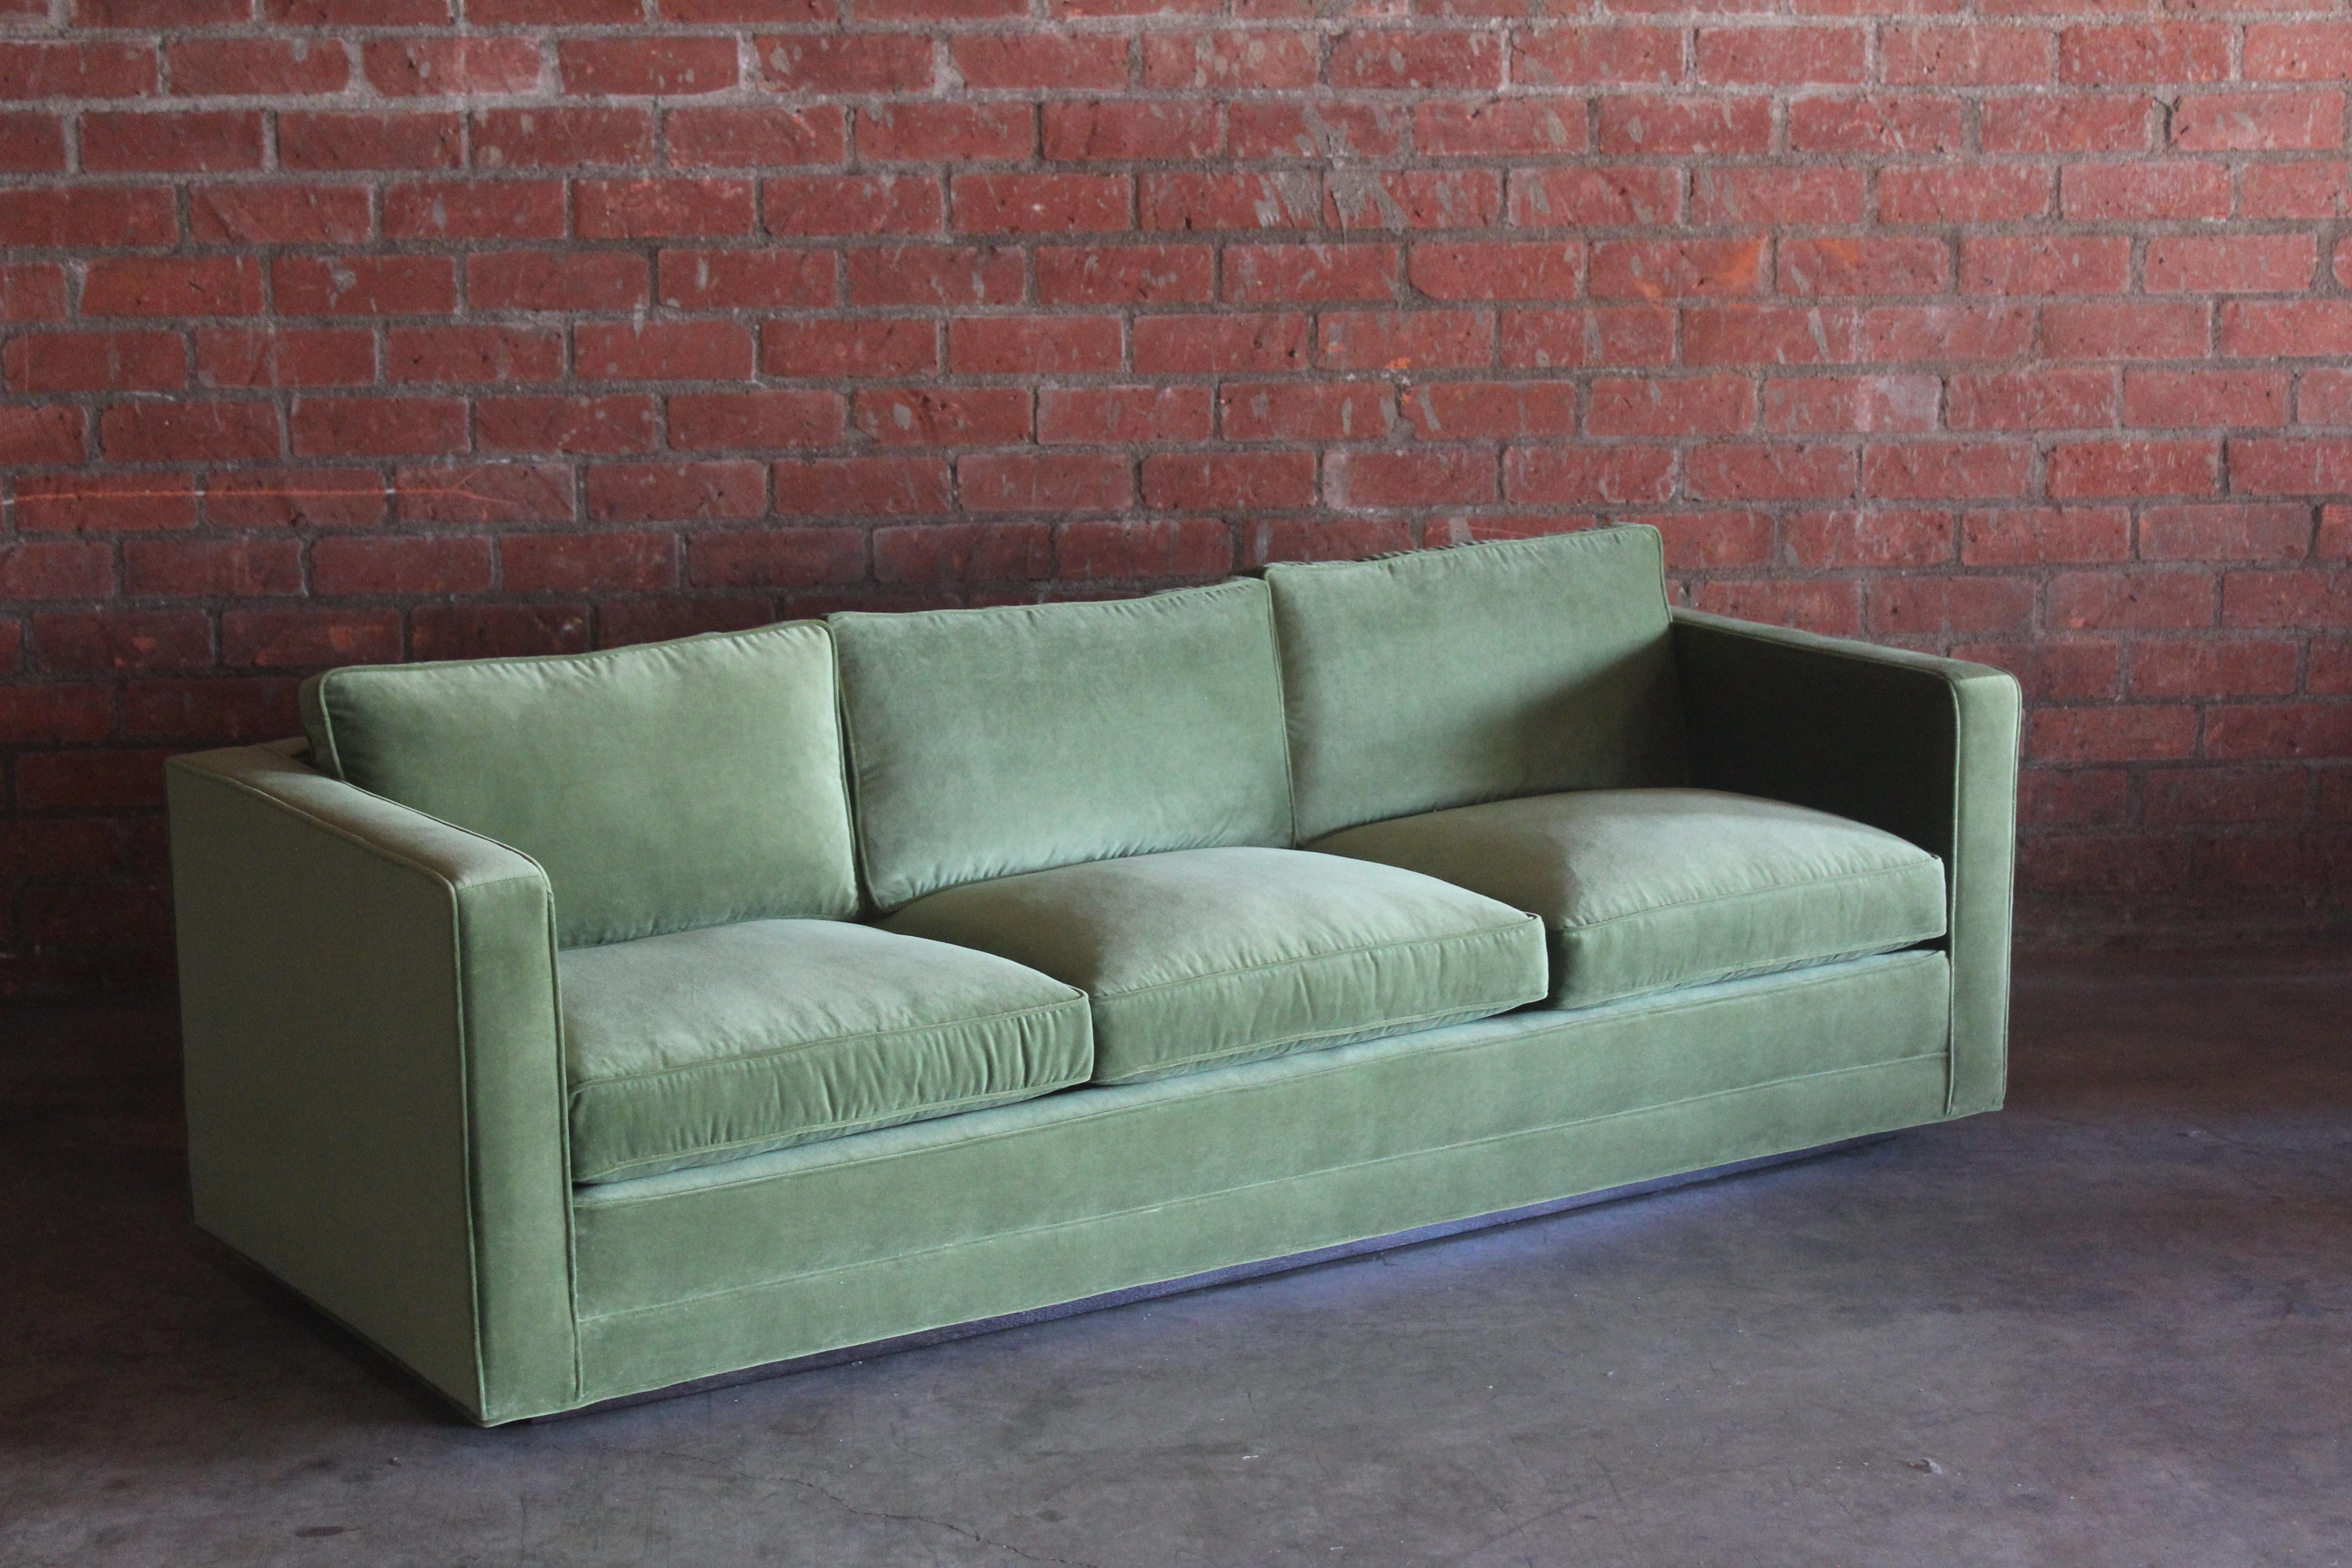 Mid-20th Century Tuxedo Sofa by Edward Wormley for Dunbar, 1950s. Pair Available, Sold Separately